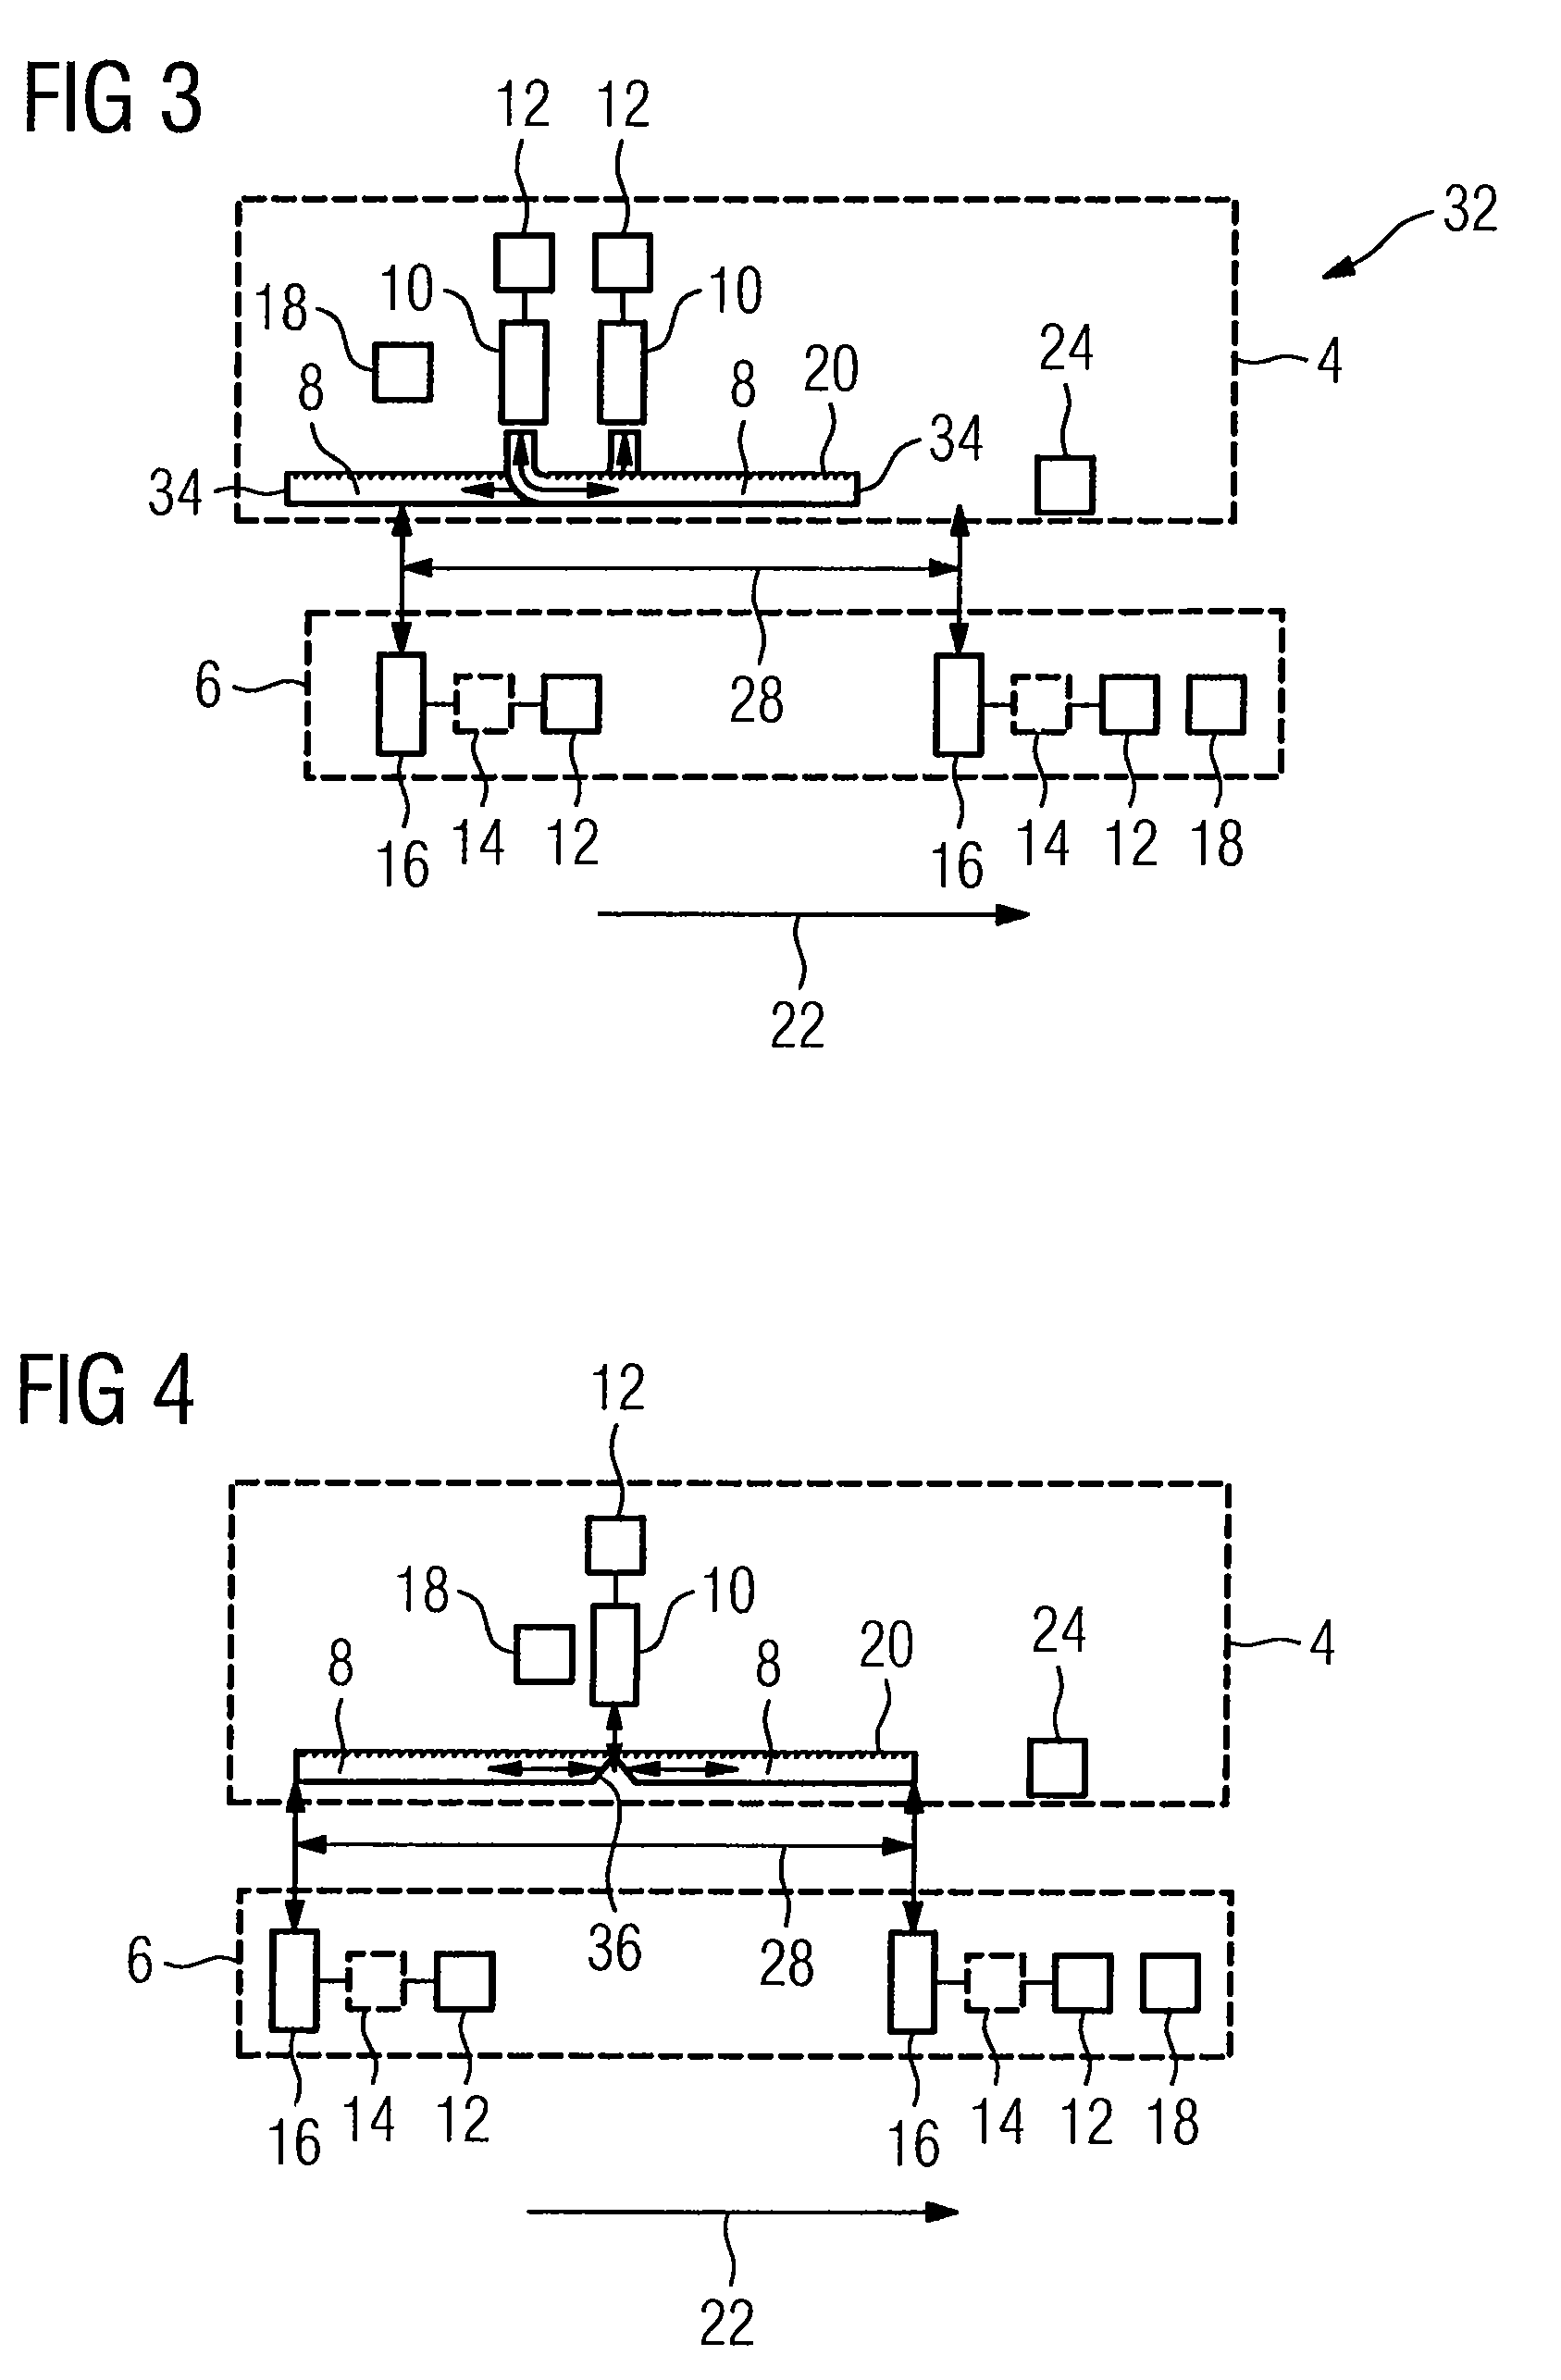 Apparatus for transmitting data between two systems which move relative to one another